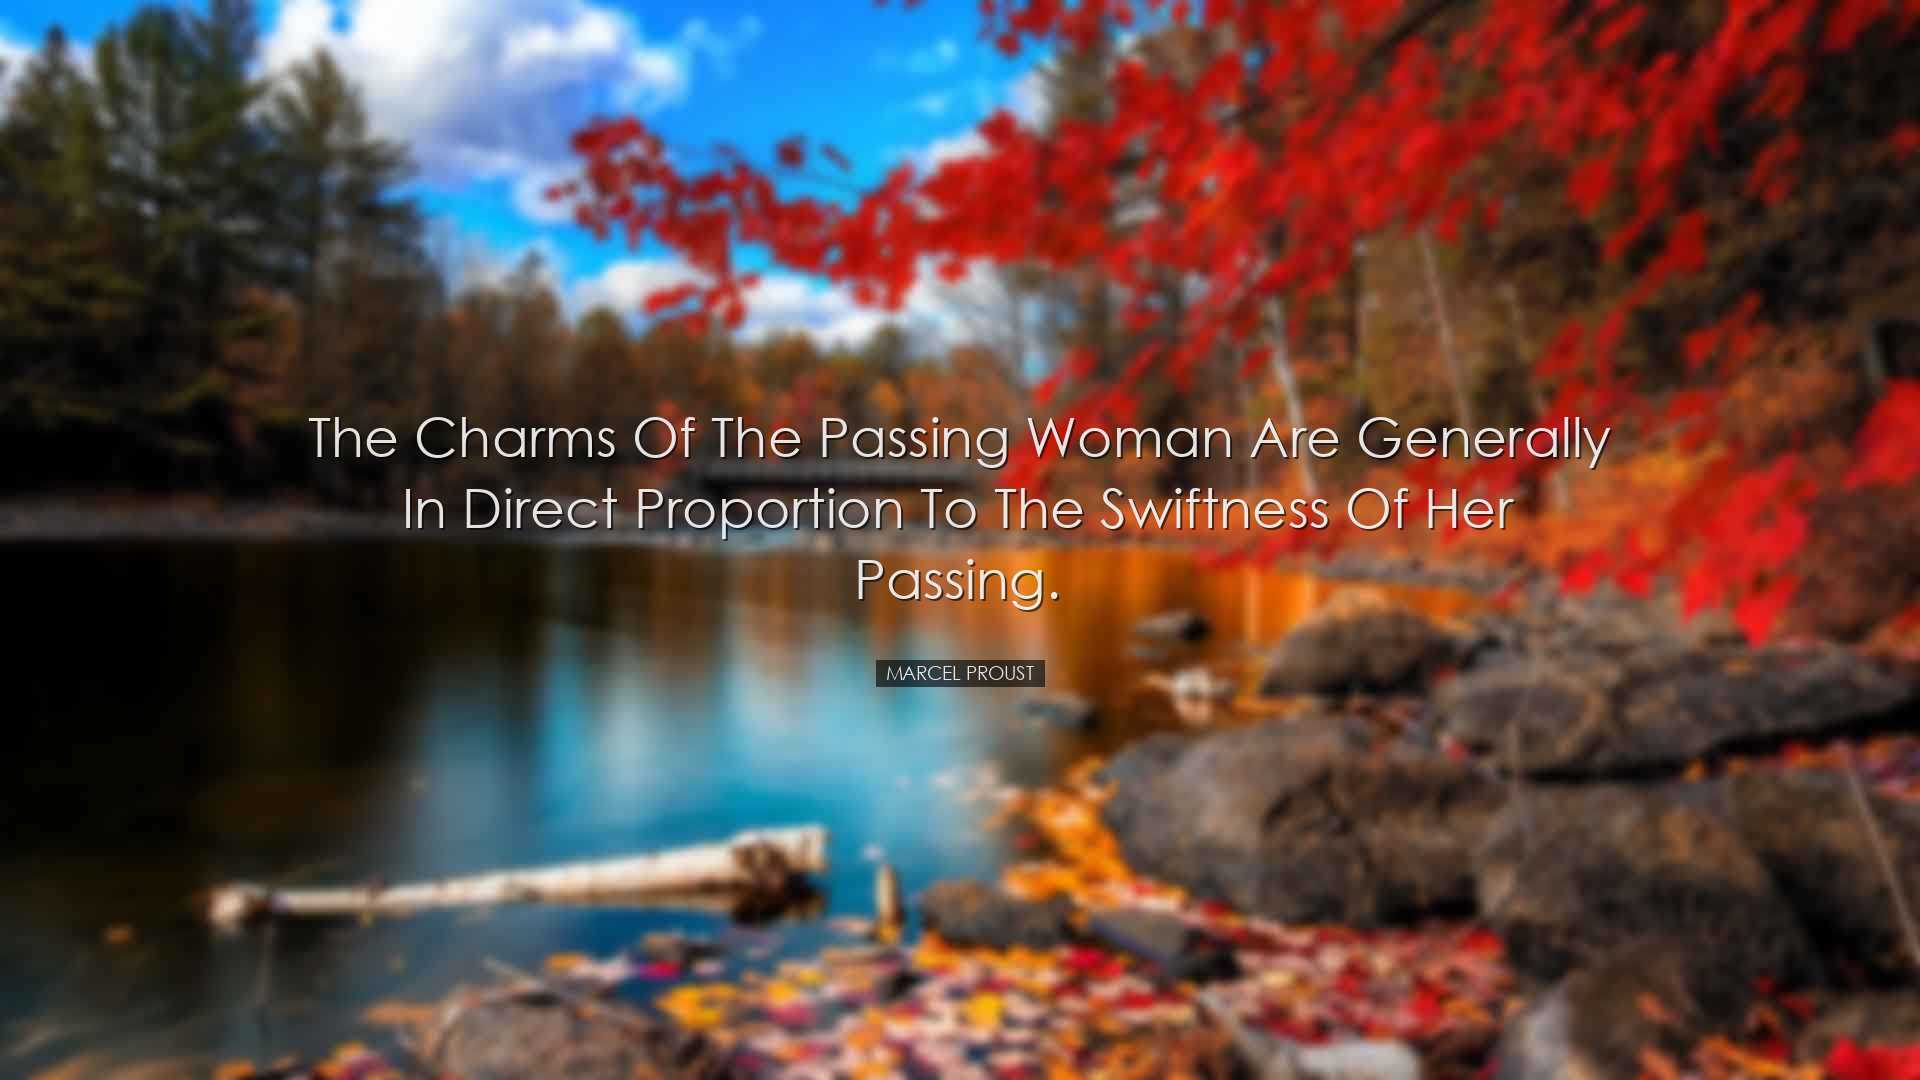 The charms of the passing woman are generally in direct proportion